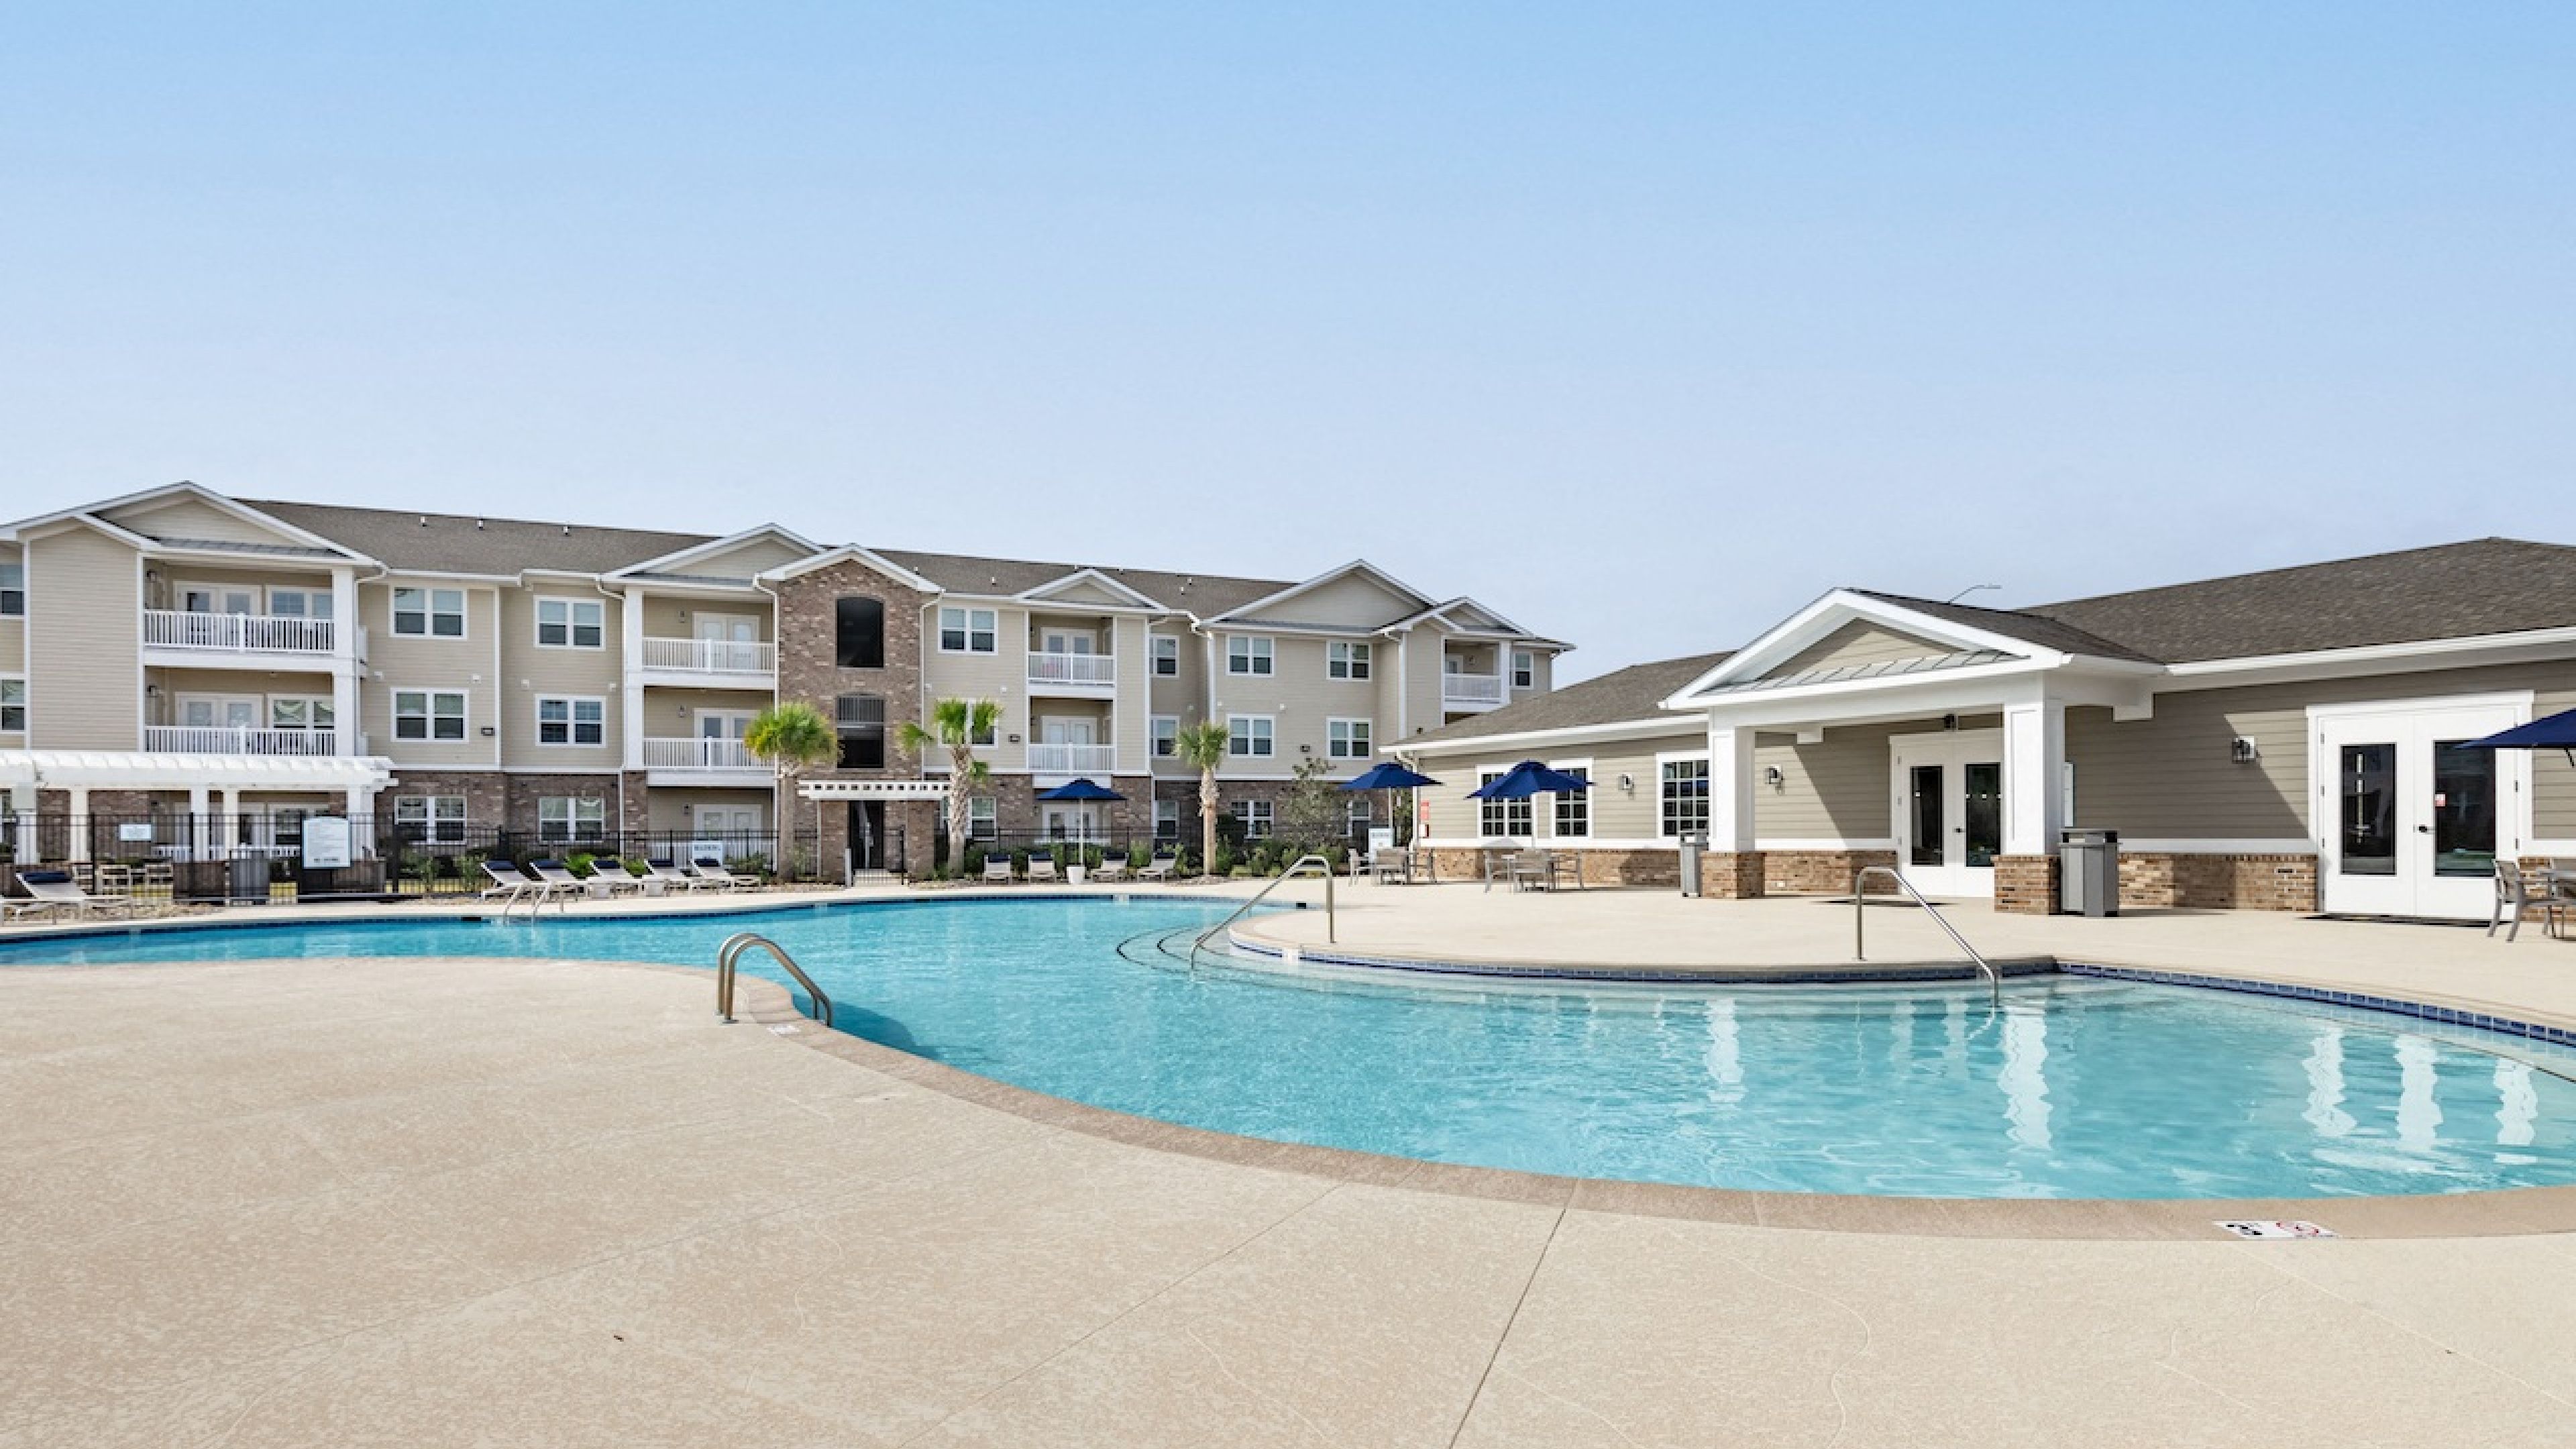 Resort-like poolside view with vibrant landscaping at Hawthorne at Stillwater, epitomizing luxury apartment living in Sneads Ferry, NC